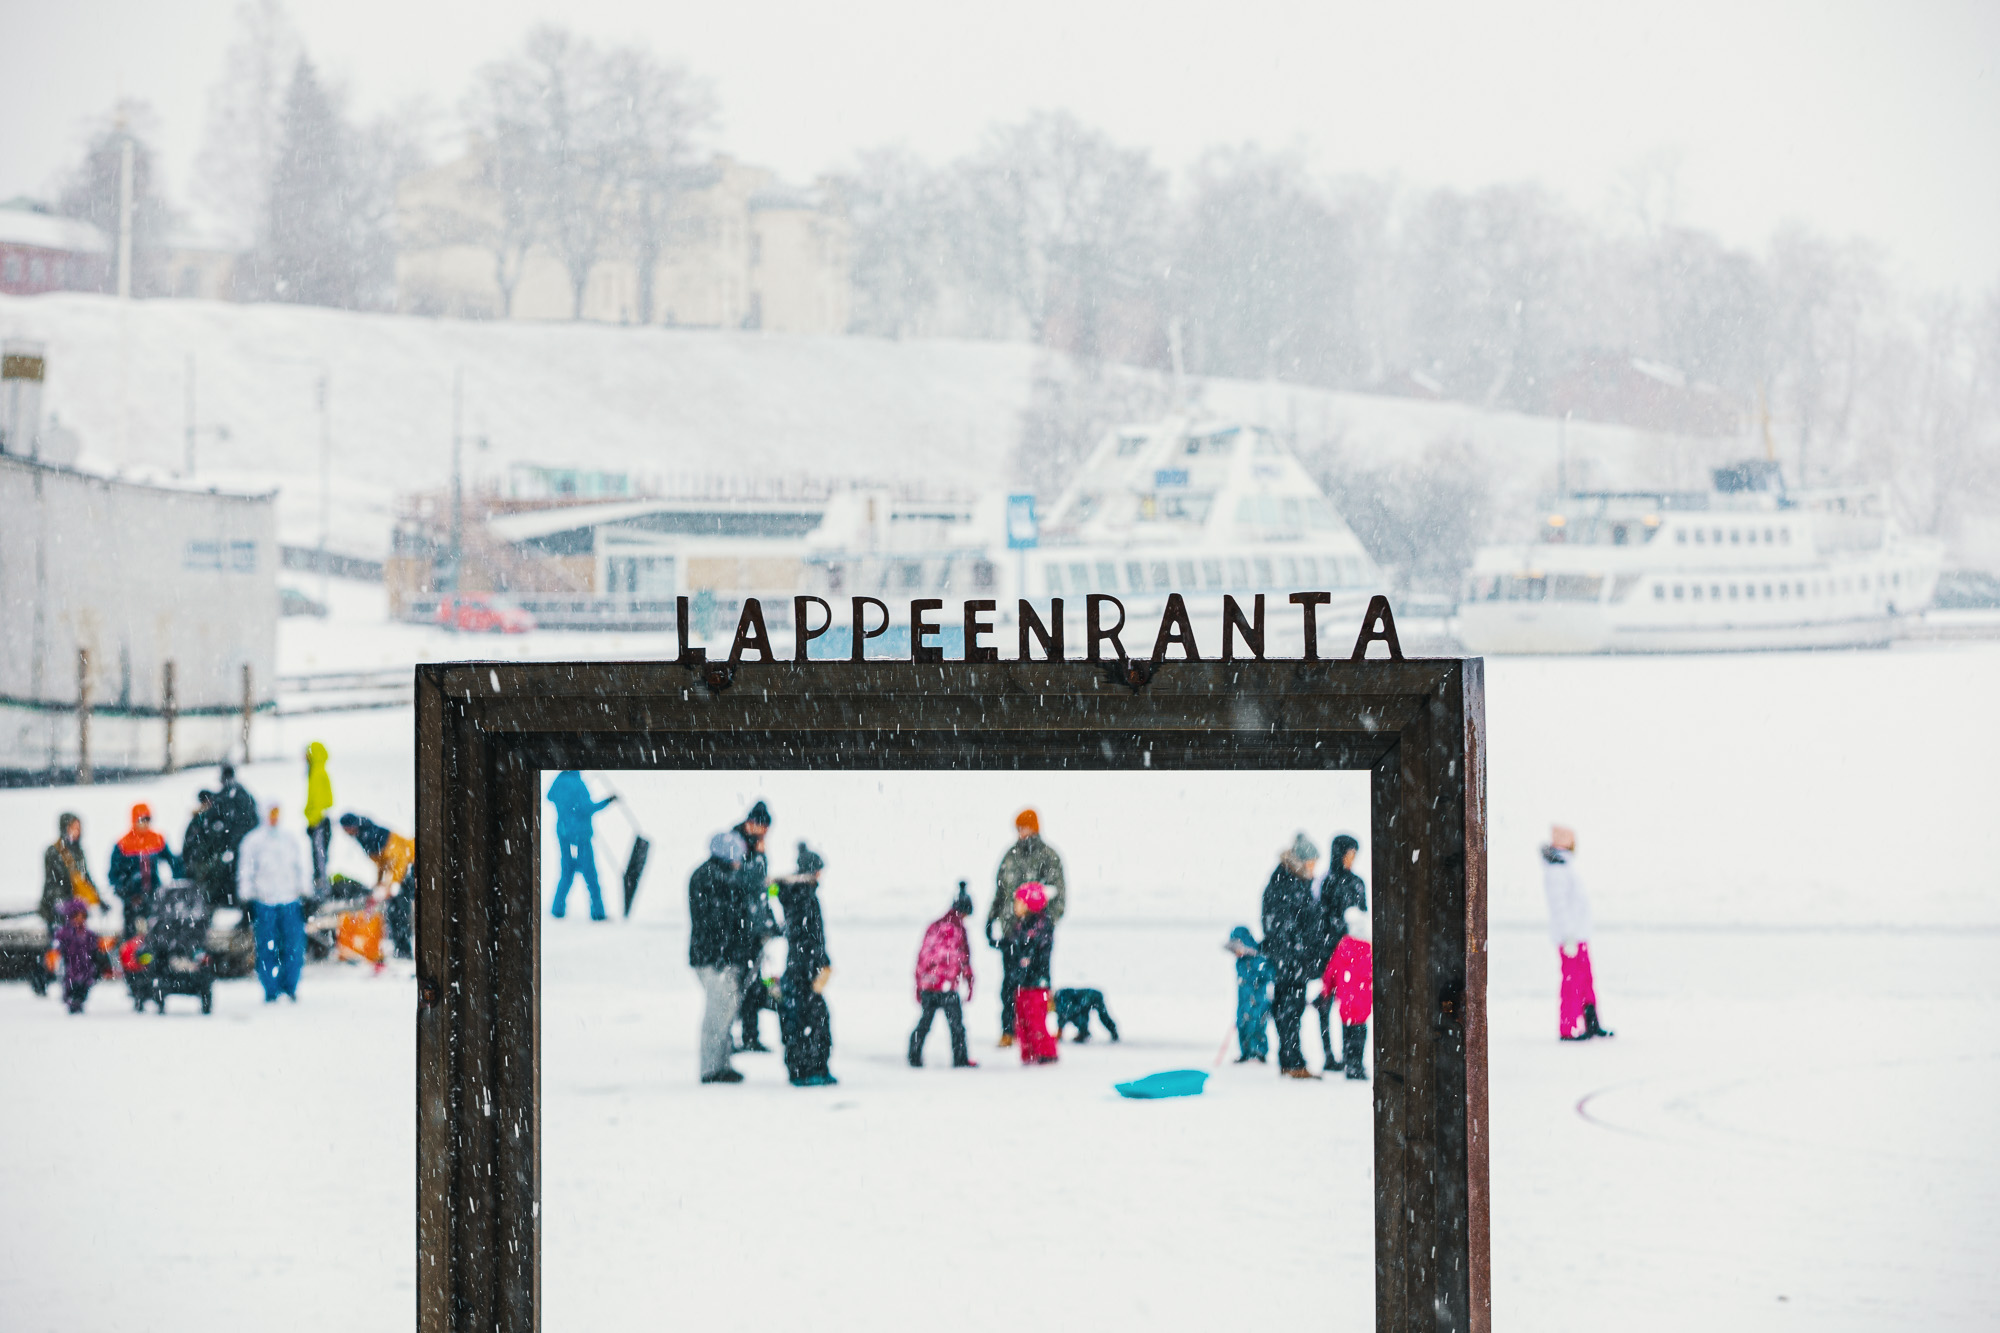 Lappeenranta city bay in winter and the public at the event